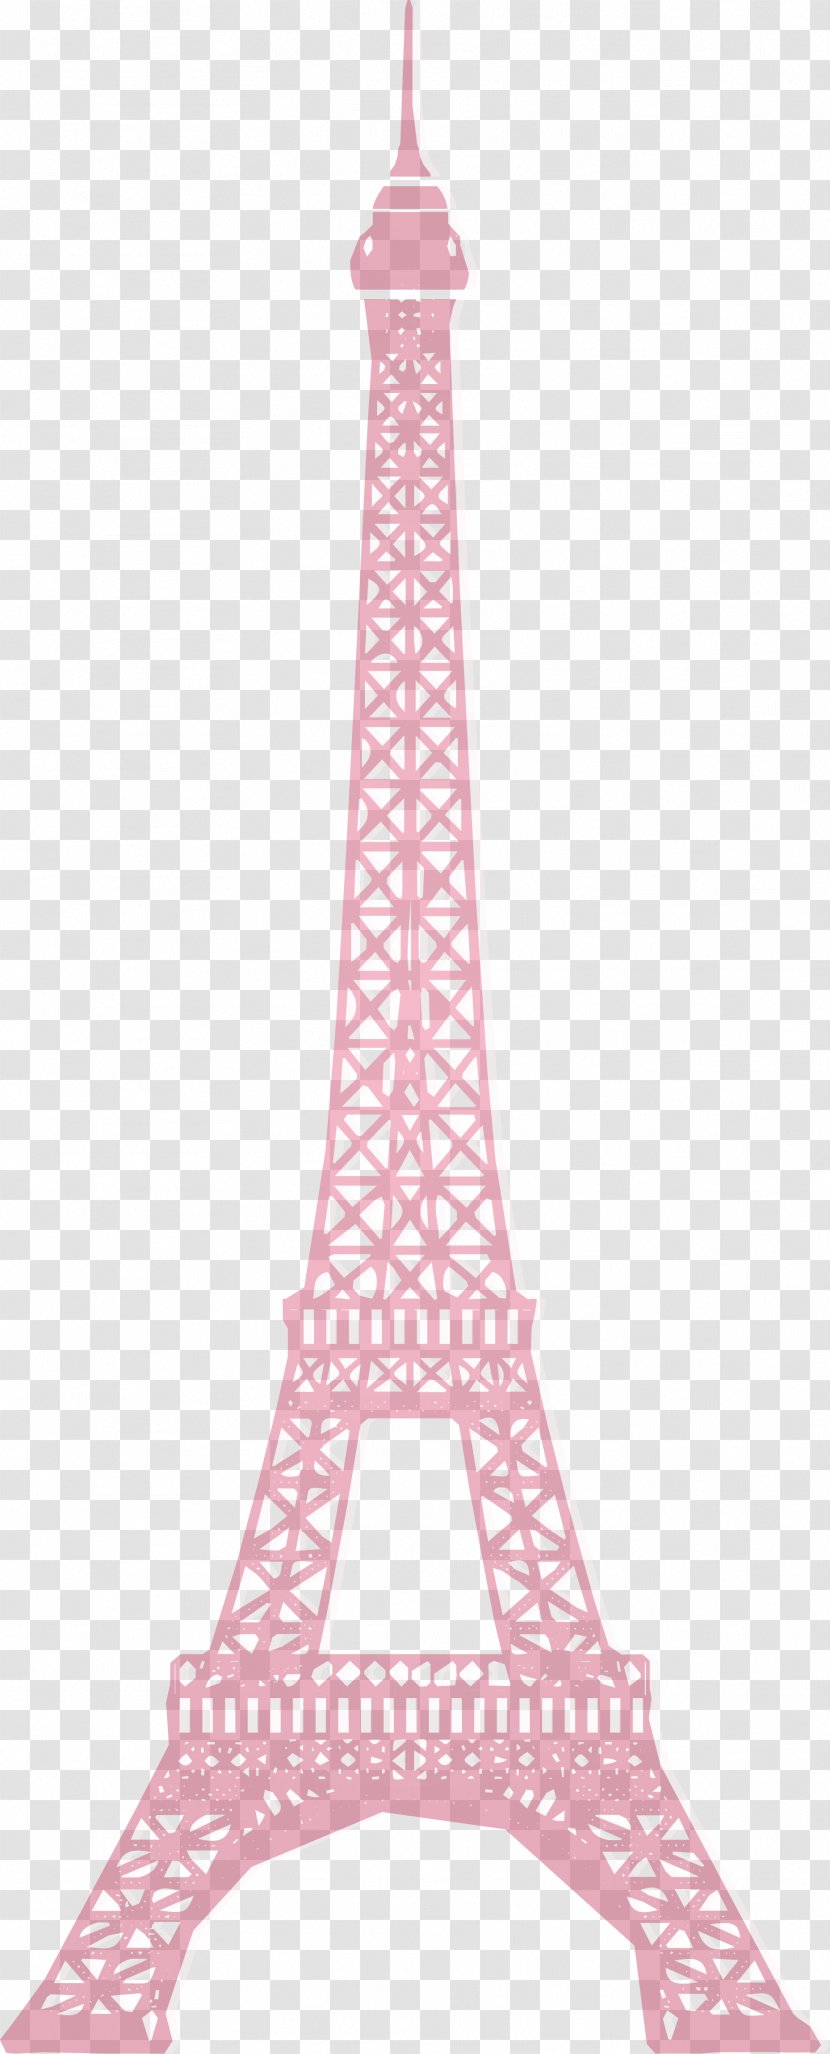 Eiffel Tower Monument Wall Decal - Pink - Silhouette Vector Transparent PNG